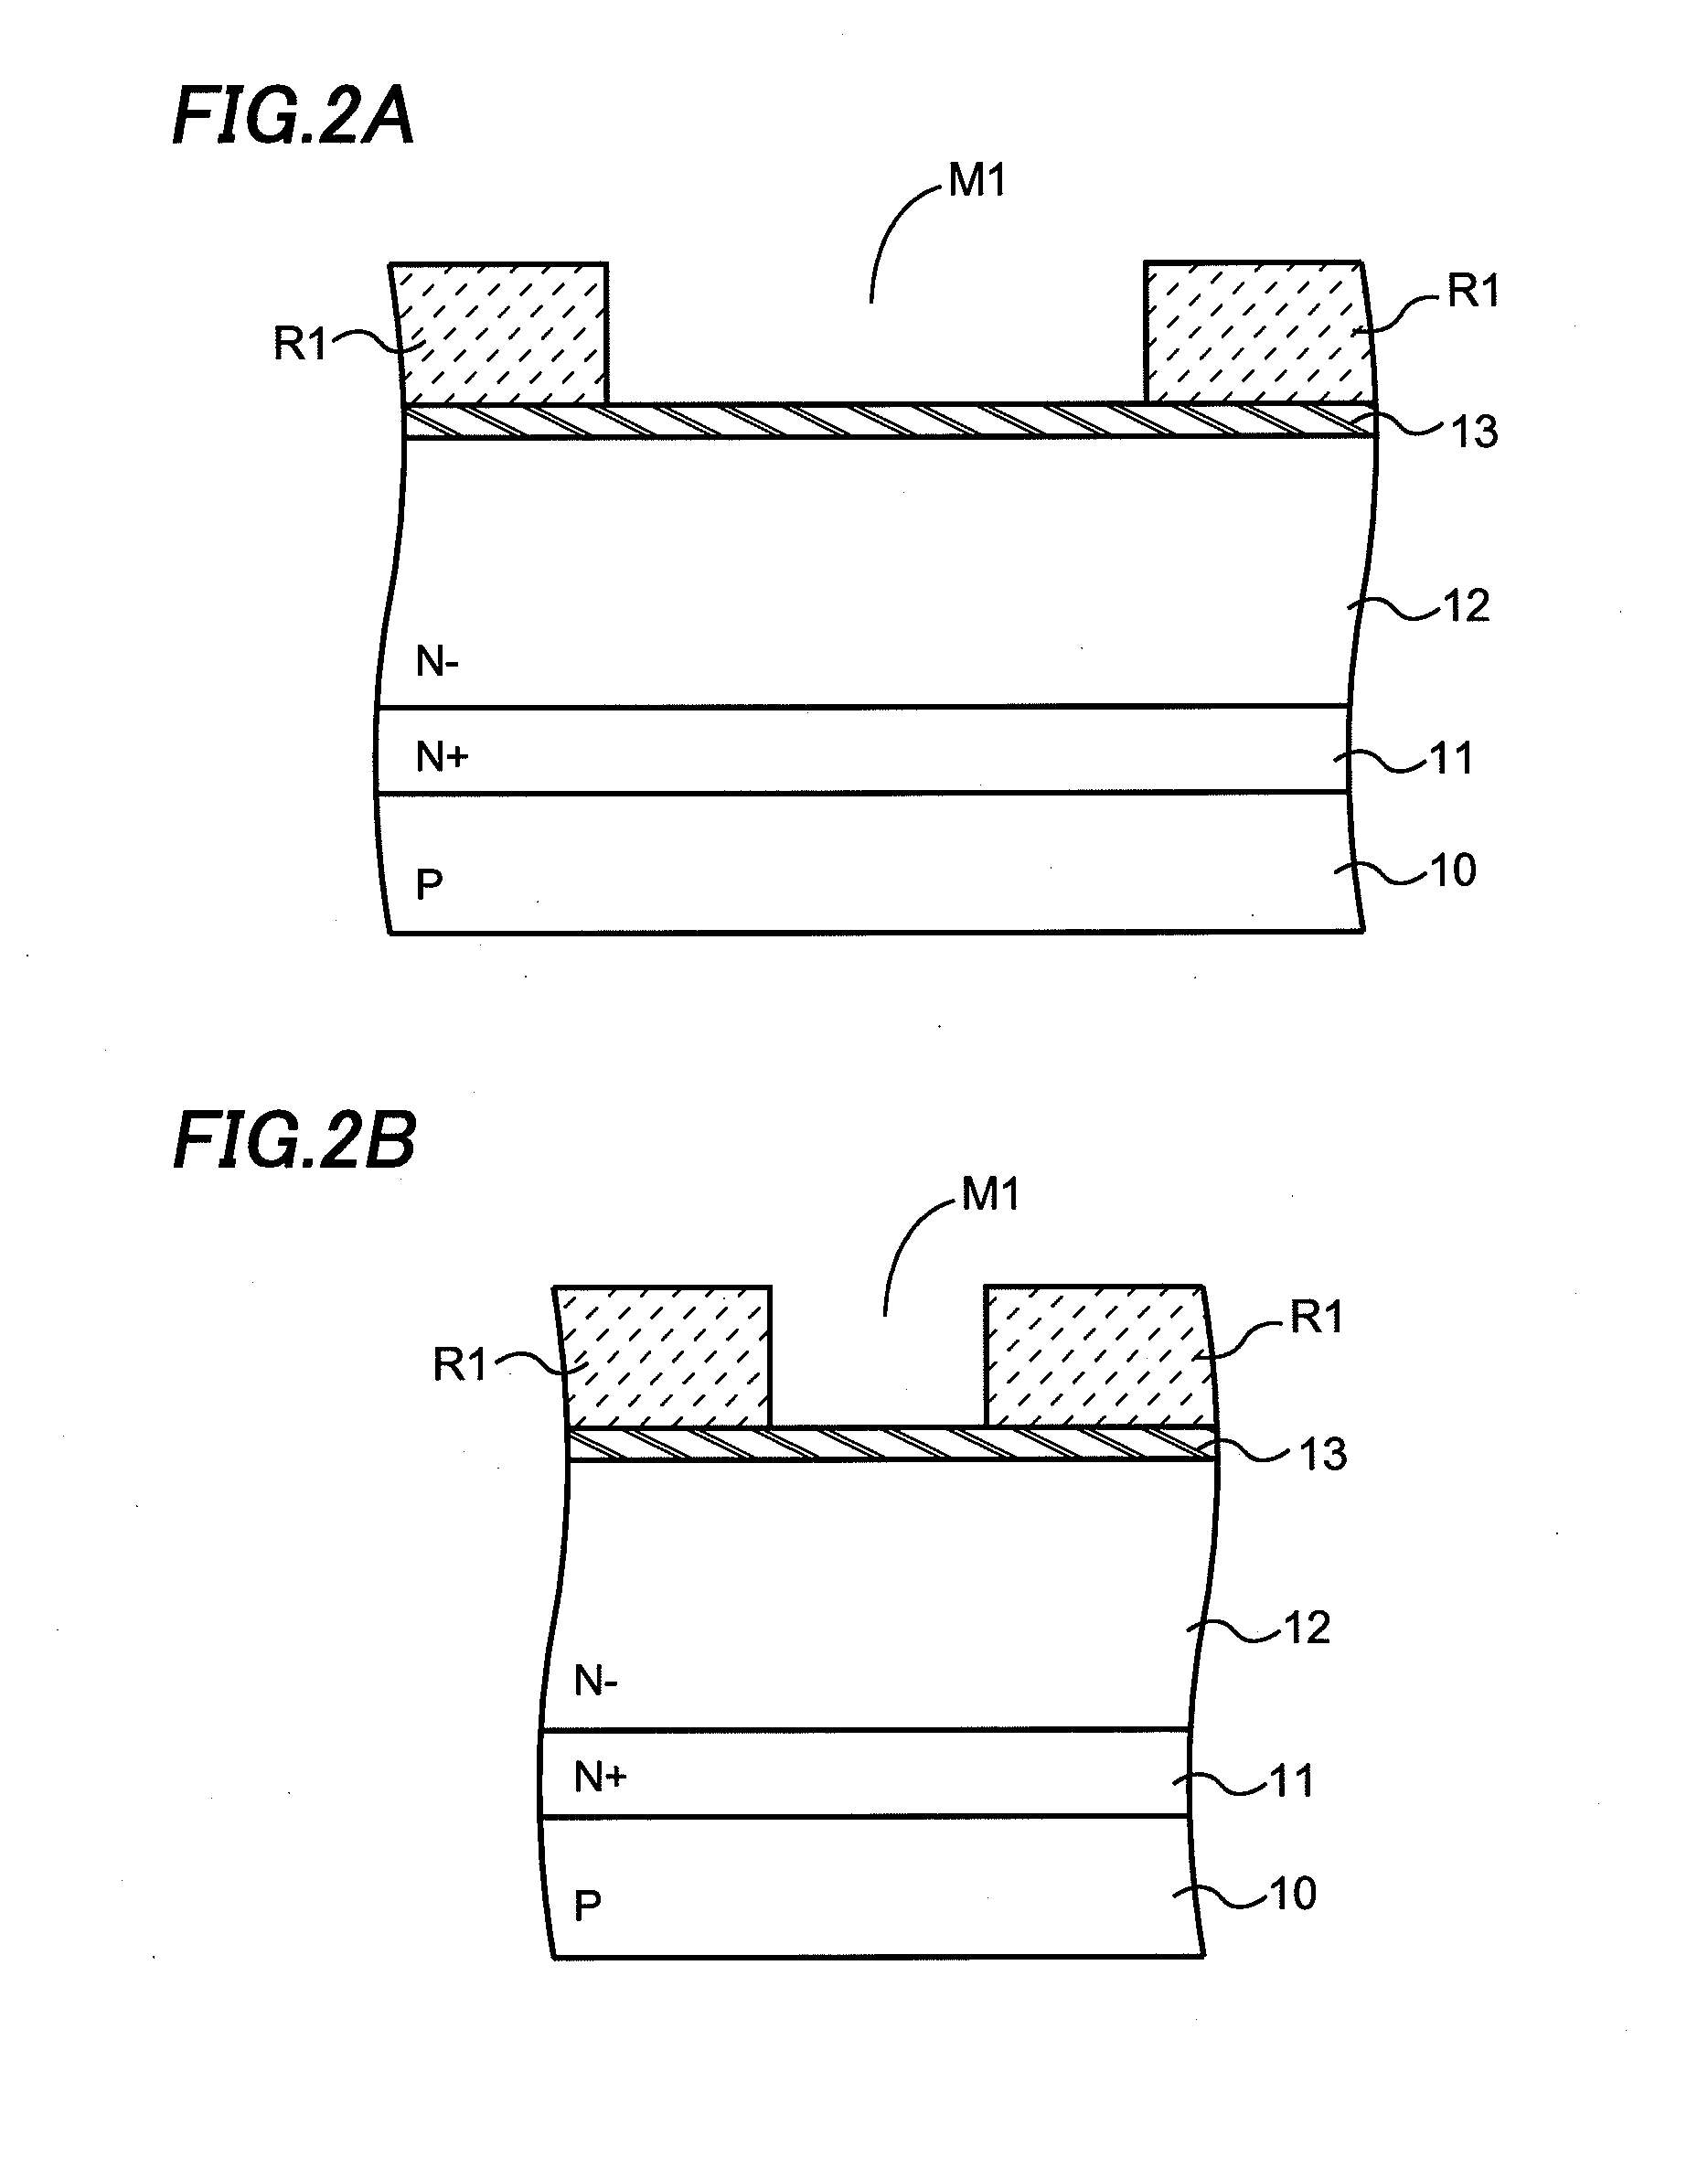 Trench gate type transistor and method of manufacturing the same